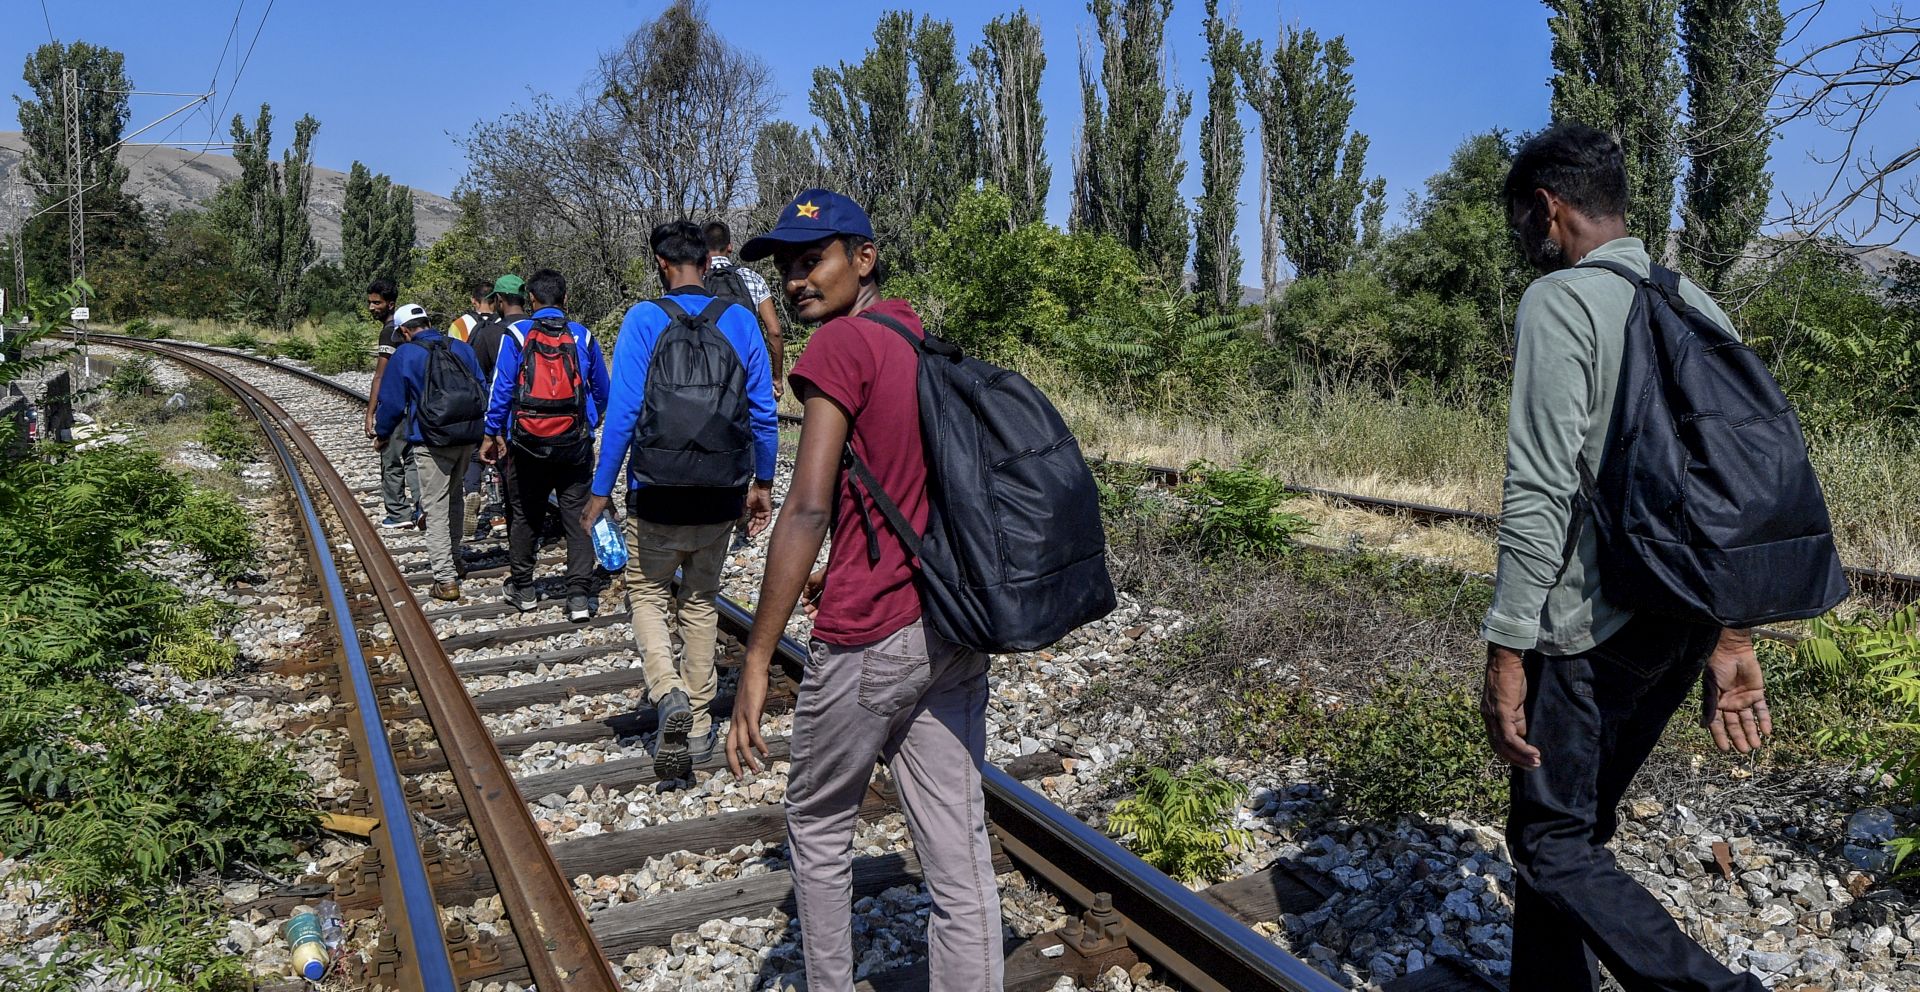 epa07772811 A group of Pakistani illegal migrants walk on the railroad by the town of Veles, Republic of North Macedonia on 14 August 2019. Reports state that they have been traveling from the Greek - North Macedonian border to the town of Veles  (around 100 km) for seven days. Although the Balkan migrant route has been officially closed since 03 March 2016, small groups of migrants are still illegally passing the border between Greece and North Macedonia and travel through North Macedonia on their way to western Europe. Some travel this road by foot, while others use the transport offered by migrant smugglers. Beside the North Macedonian police and army, the border with Greece is being patrolled by police forces from other European countries.  EPA/GEORGI LICOVSKI